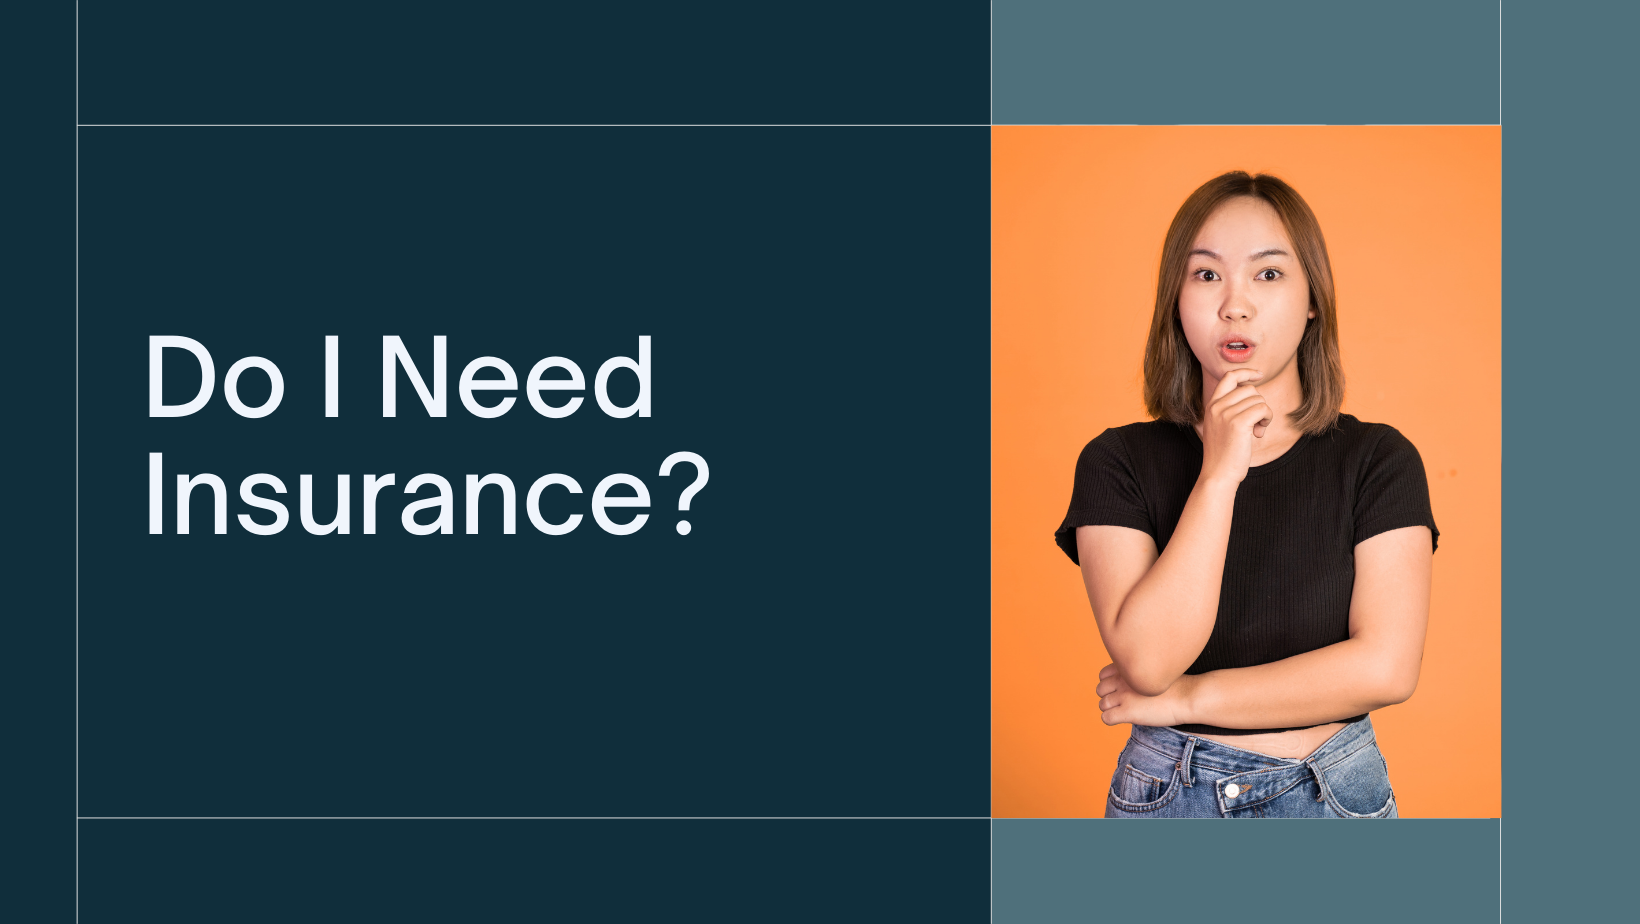 What if I think I don't need life insurance